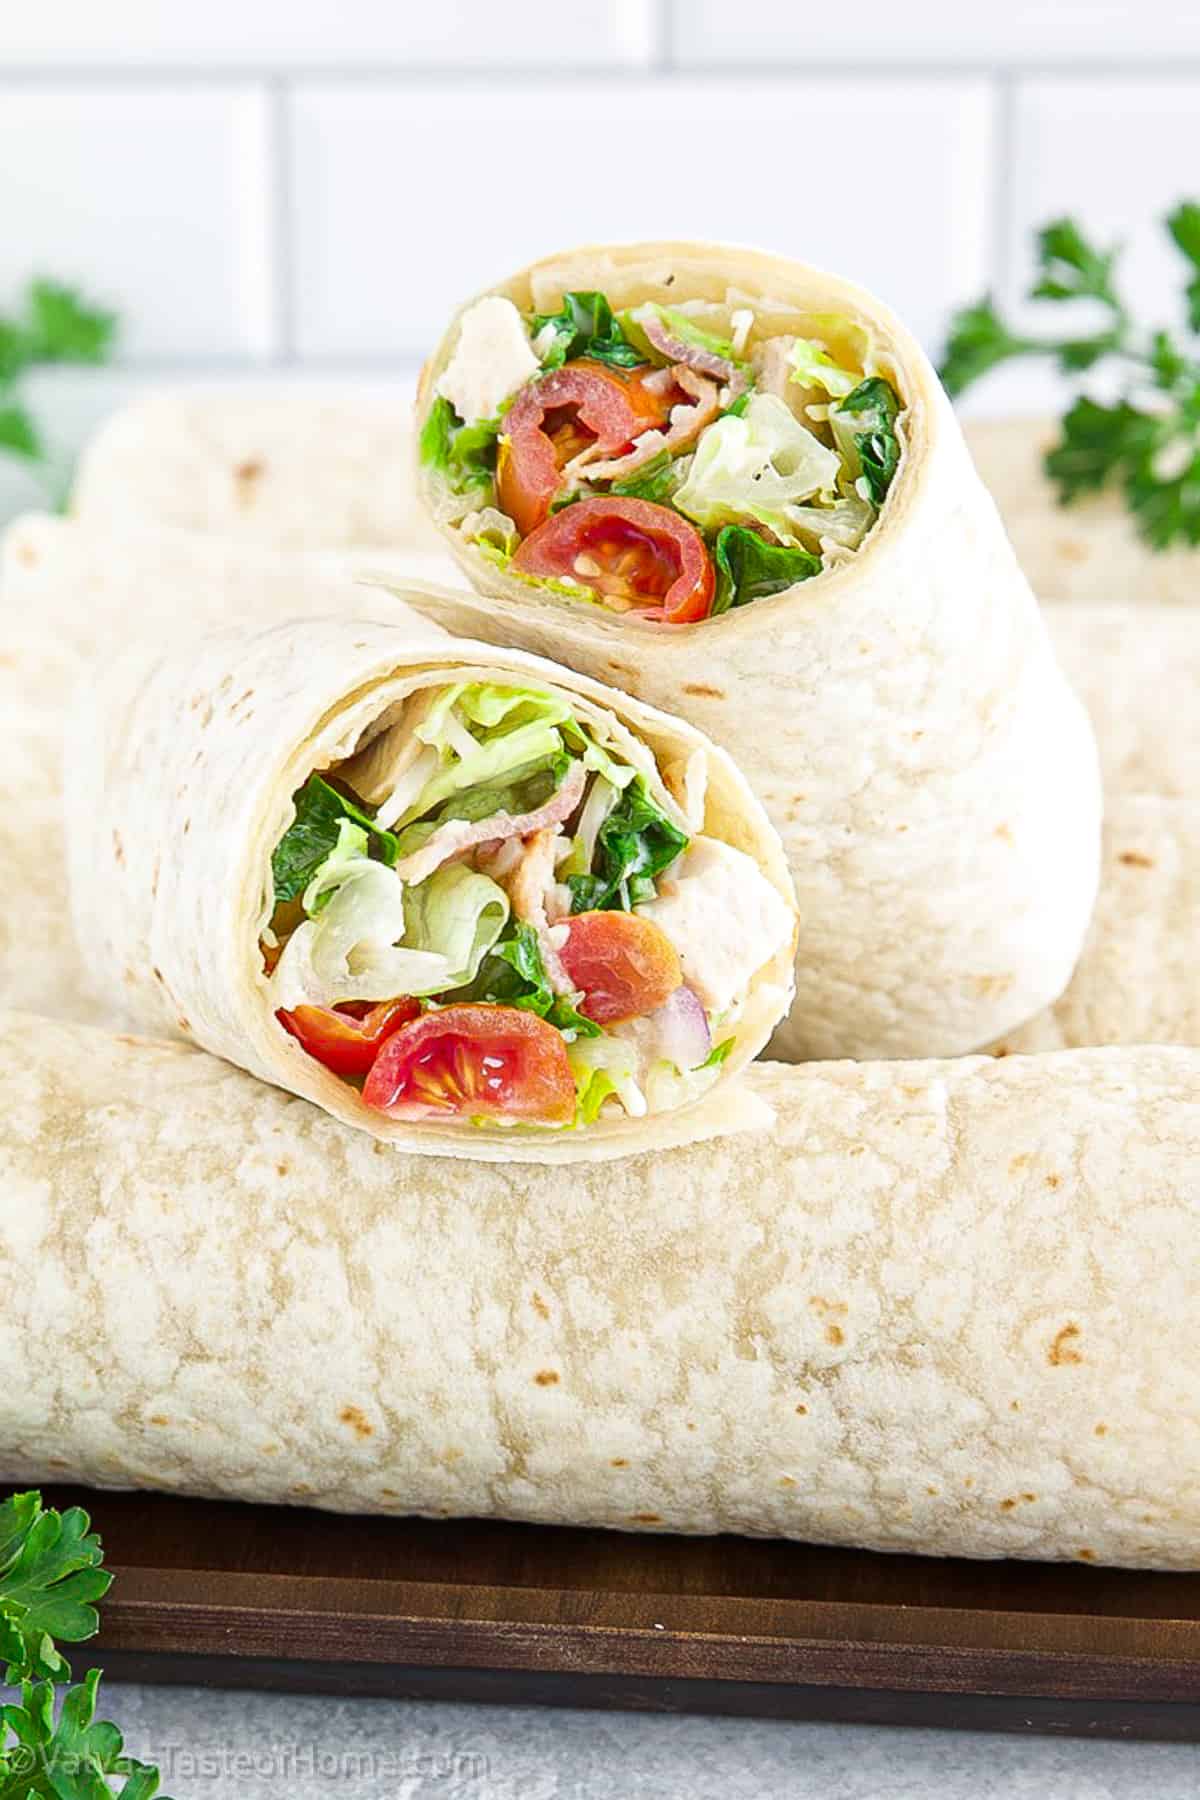 Caesar salad wraps are a delicious and easy way to enjoy the classic flavors of Caesar salad in a convenient handheld form.